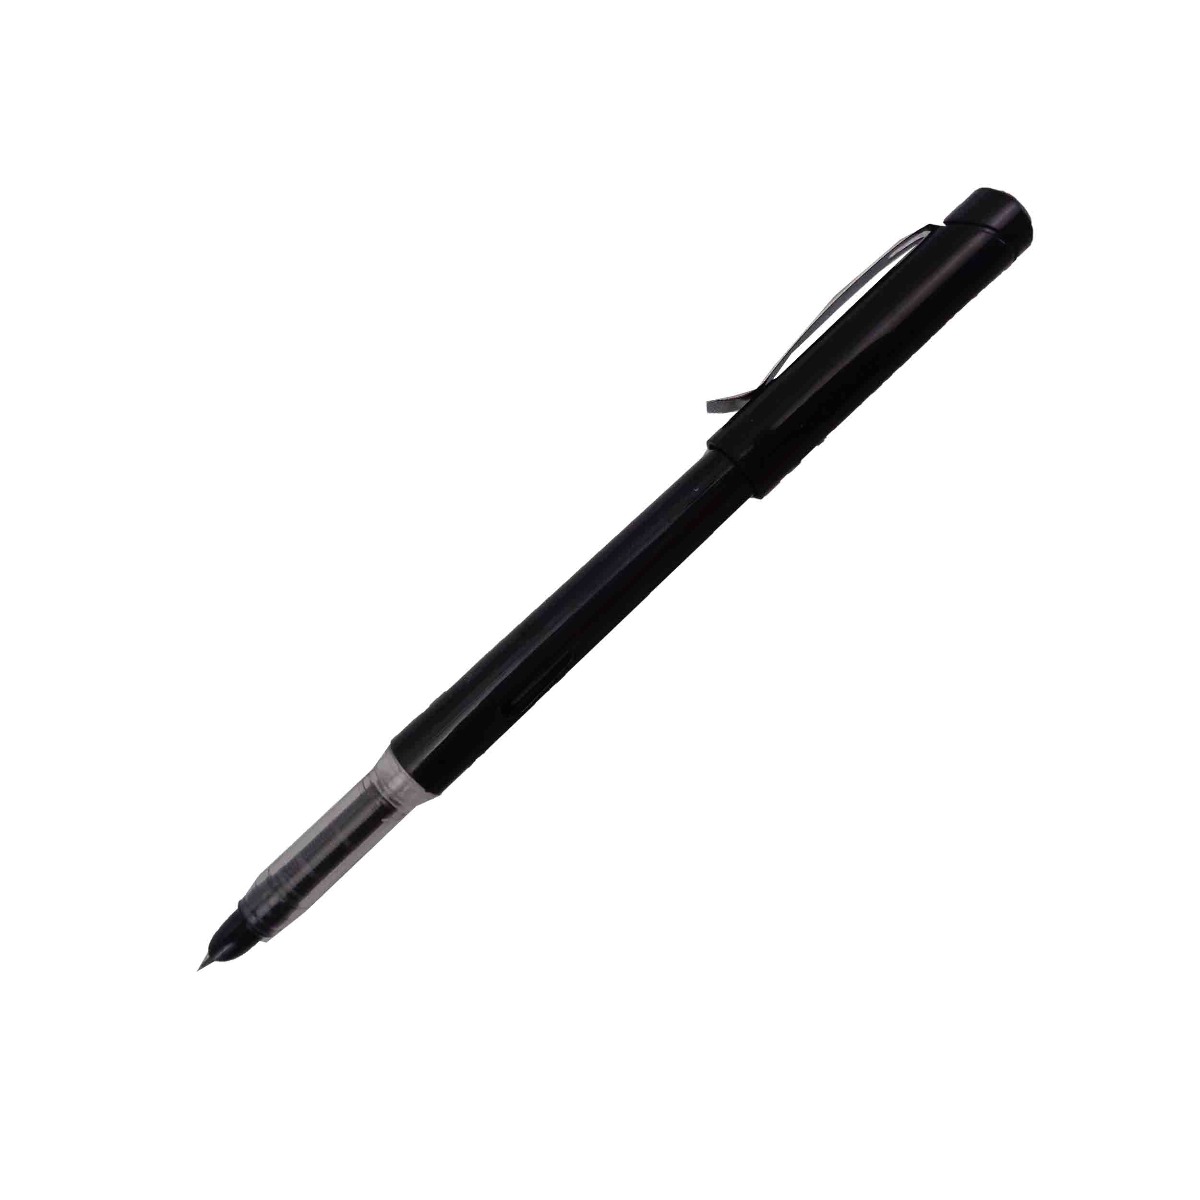 Flair Inky CFO Model:15602 Black Color Body with Cap Type and 2 Ink Catridge Fine Nib Fountain Pen